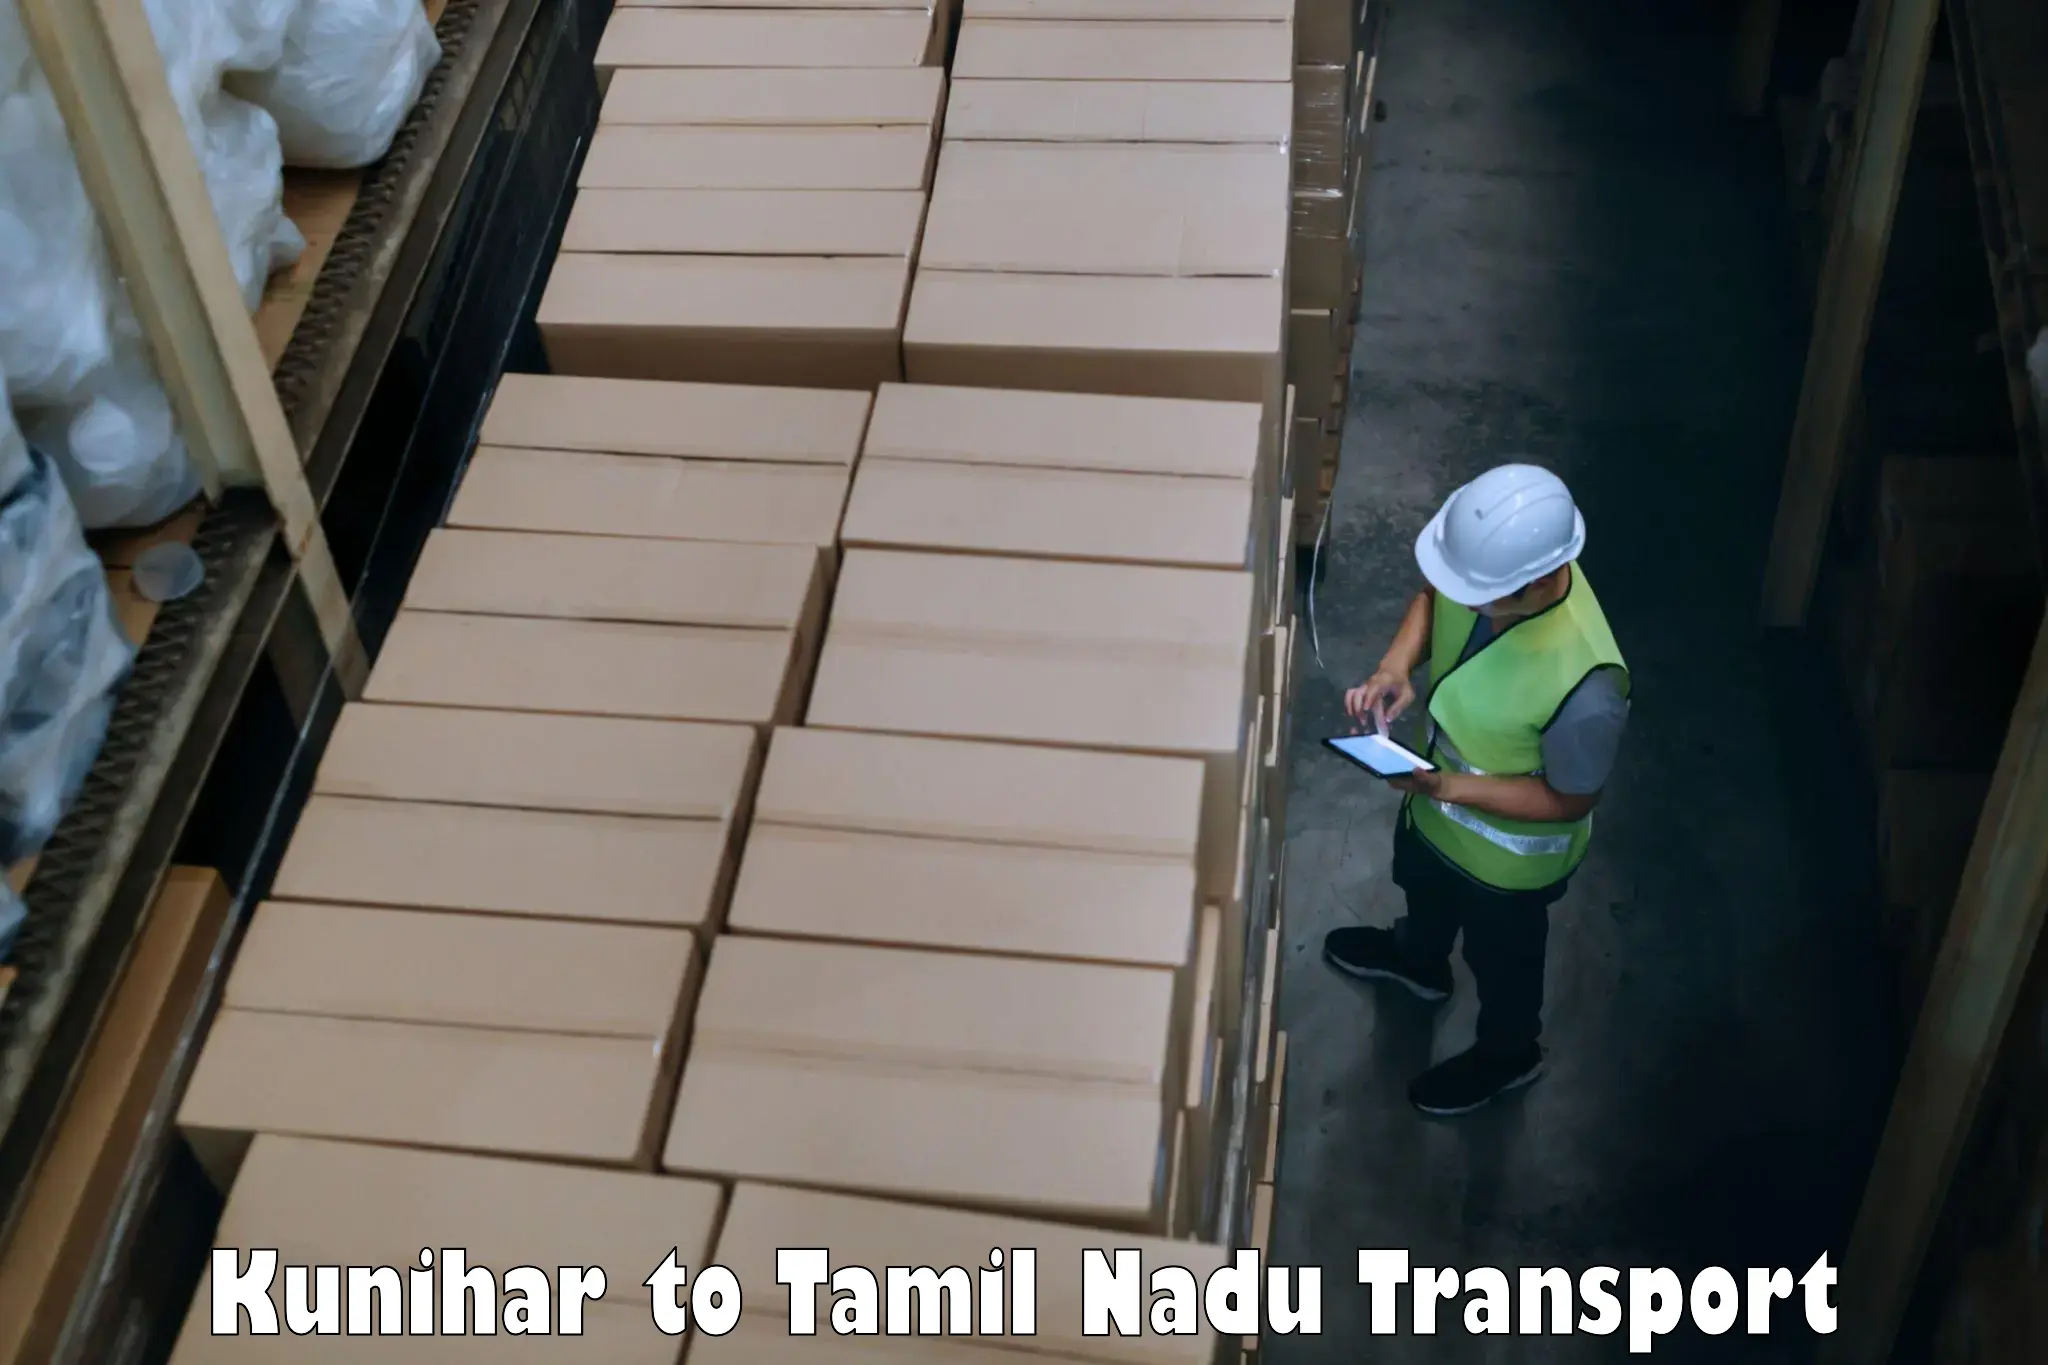 Part load transport service in India Kunihar to Vellore Institute of Technology